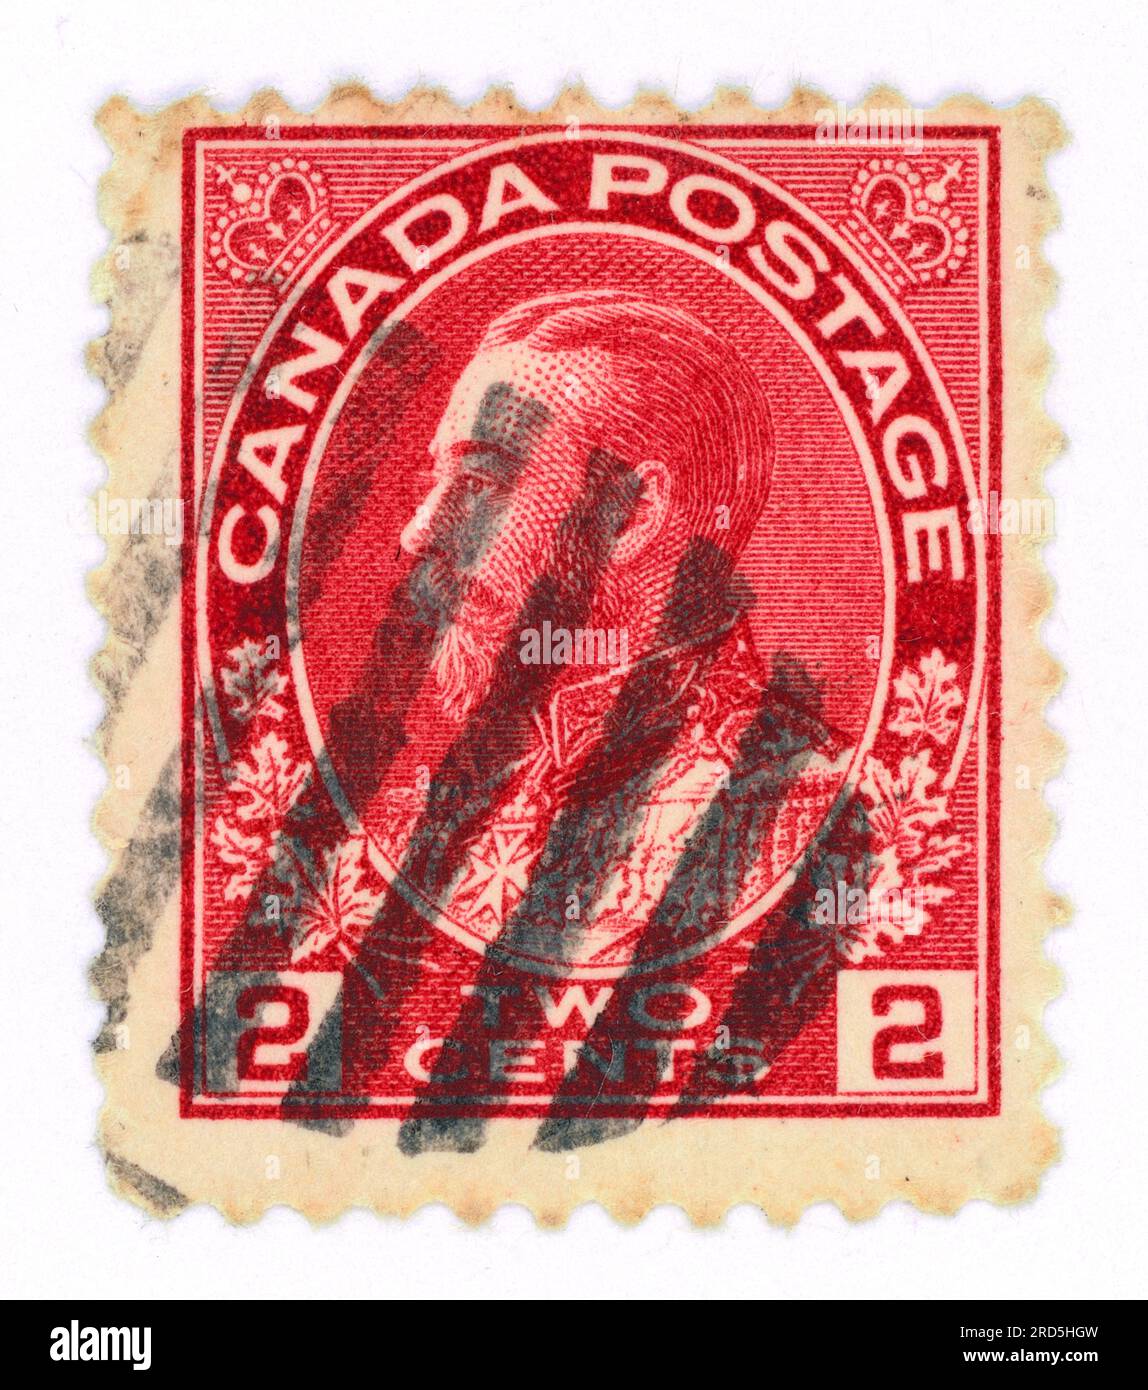 King George V (ruled 1910–1936). Postage stamp issued in Canada in 1910s. Stock Photo